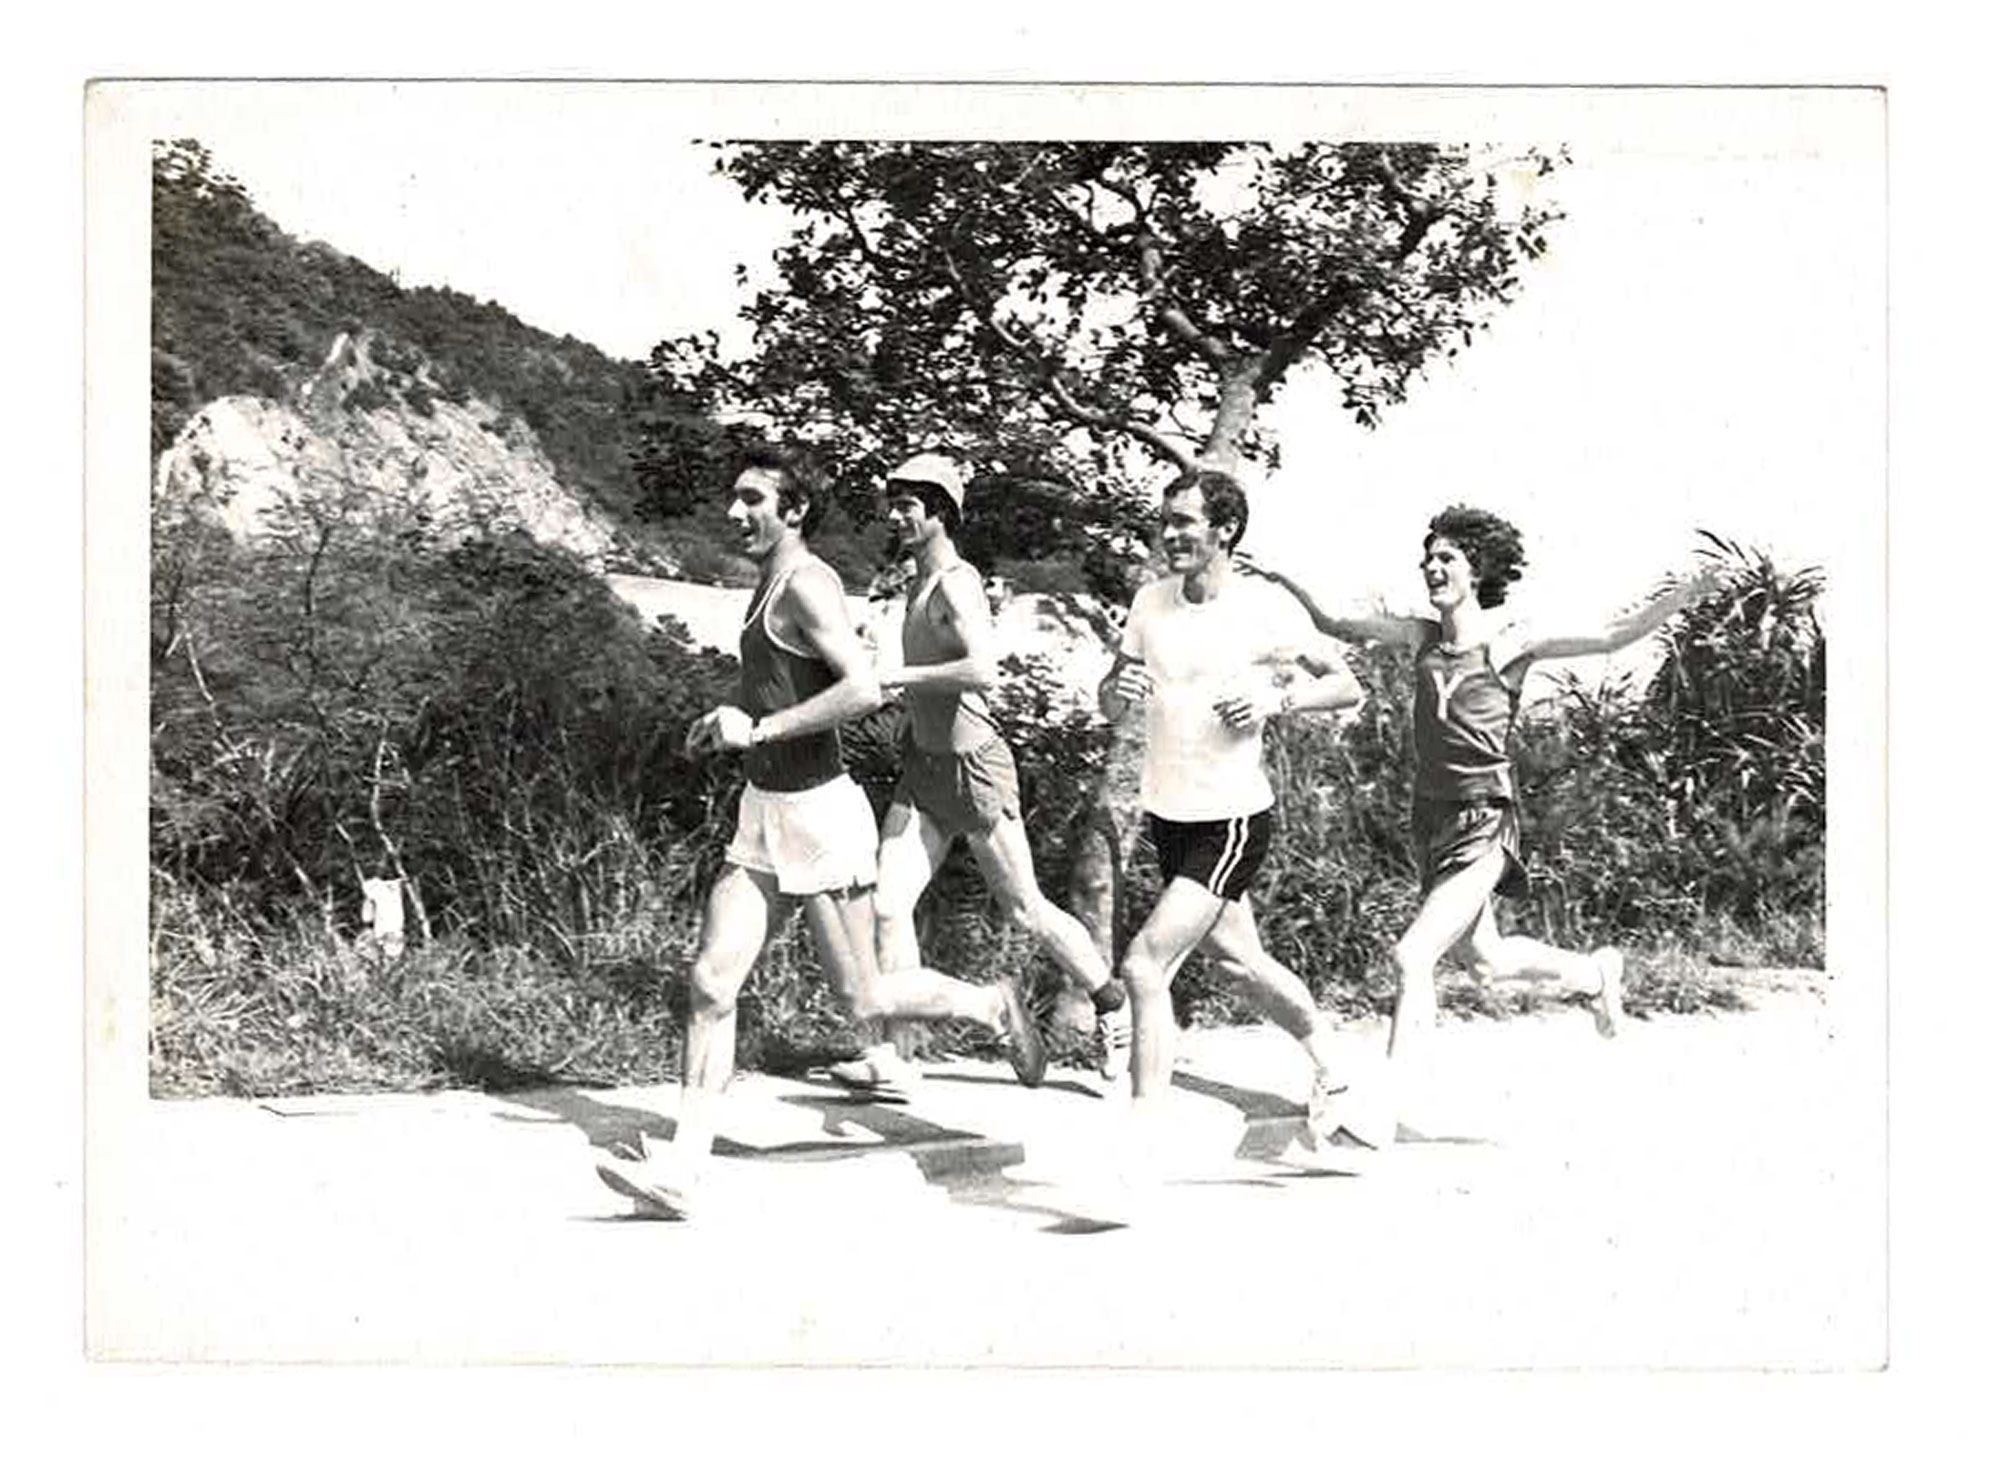 Hong Kong’s first ultra event, 1976, which would become Mid-May Madness. Near Tai Tam Reservoir are (from left) Malcolm Phillips, Graham Smith, Phil Roberts, Steve Reels. Photo: Handout